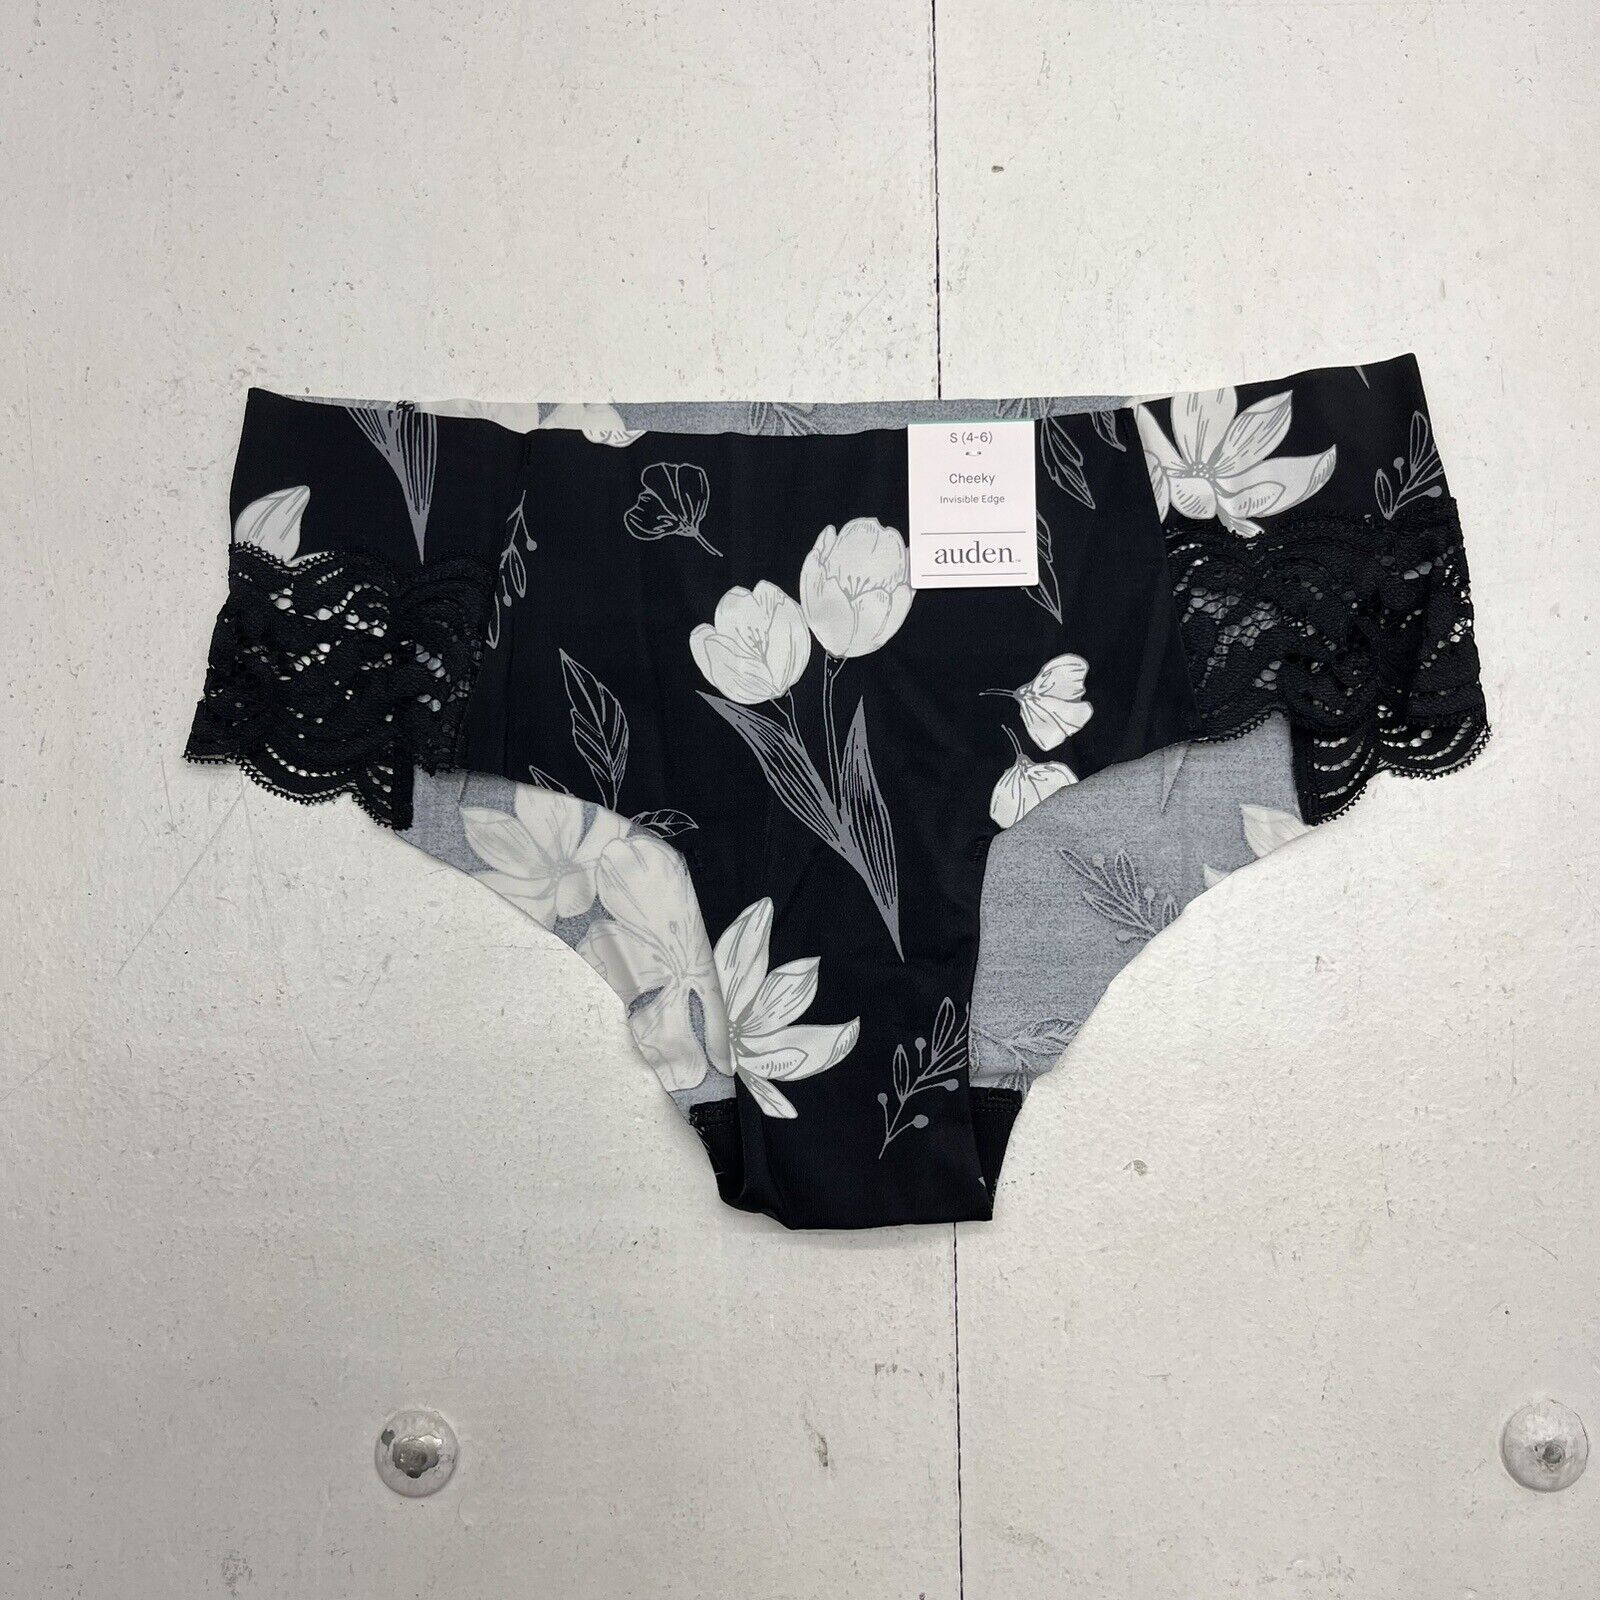 Auden Black Floral Cheeky Invisible Edge Underwear Women’s Size Small NEW